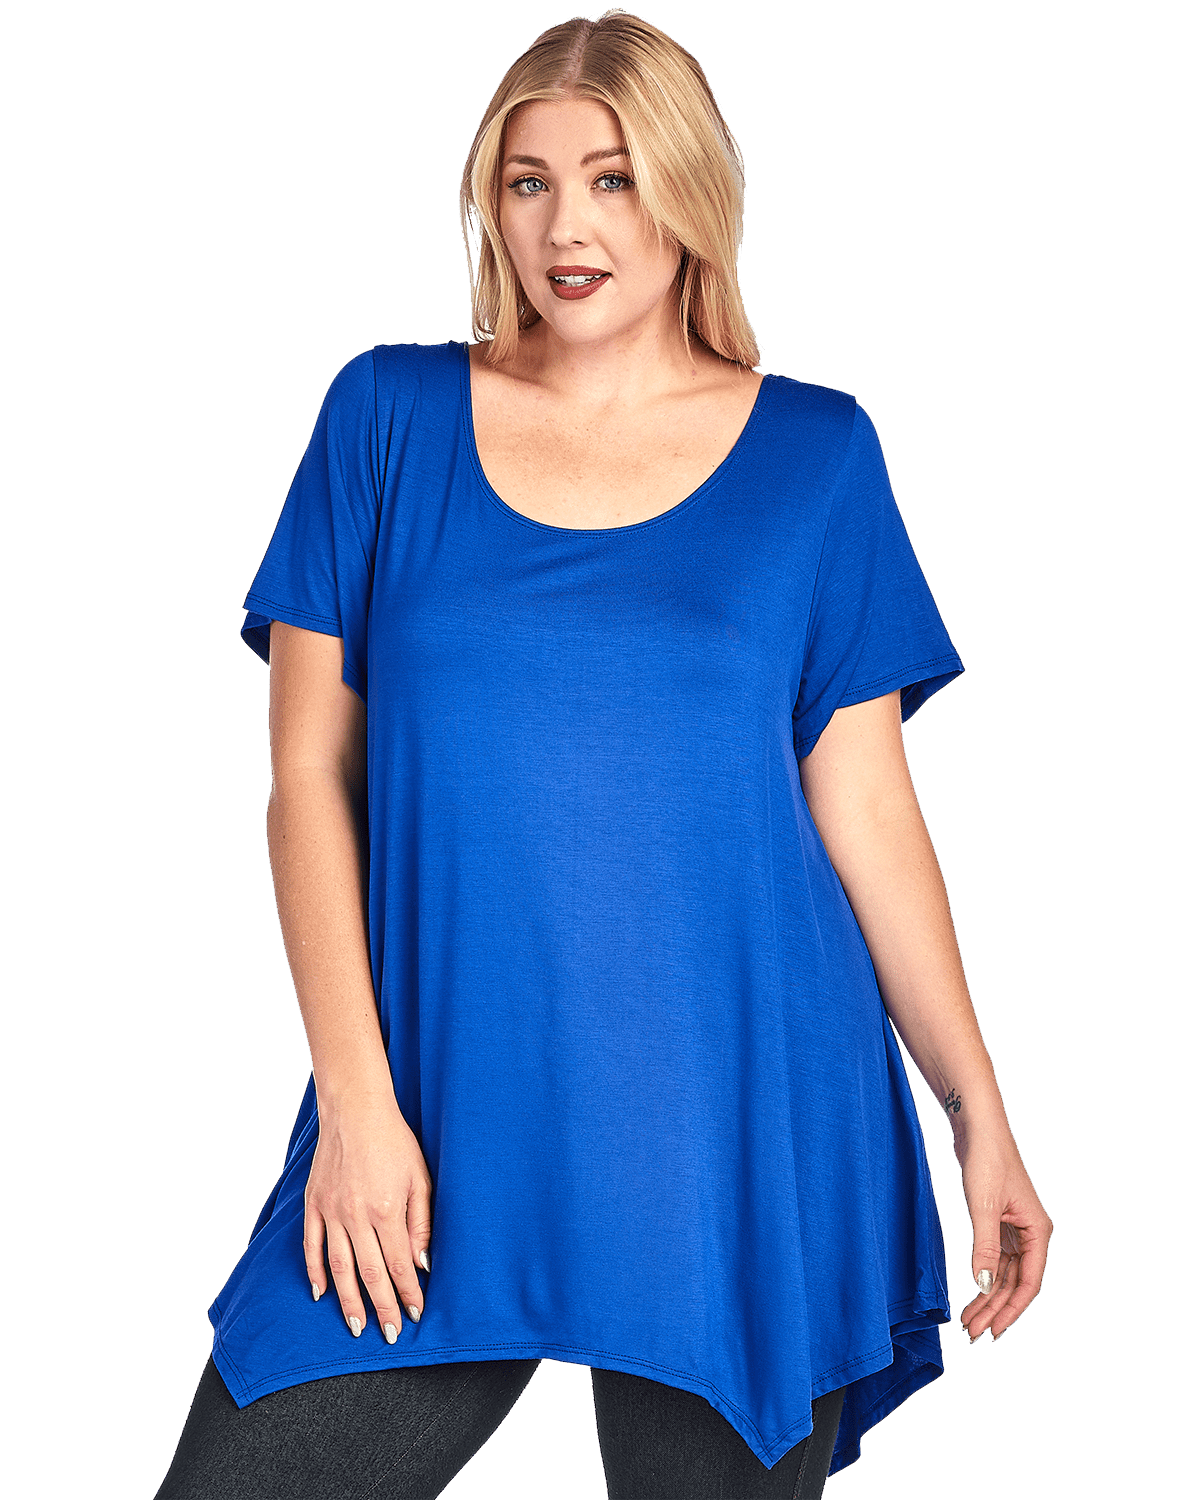 Sharon's Outlet - Plus Size Women's Curvy Casual T-Shirt MADE IN USA 1X ...